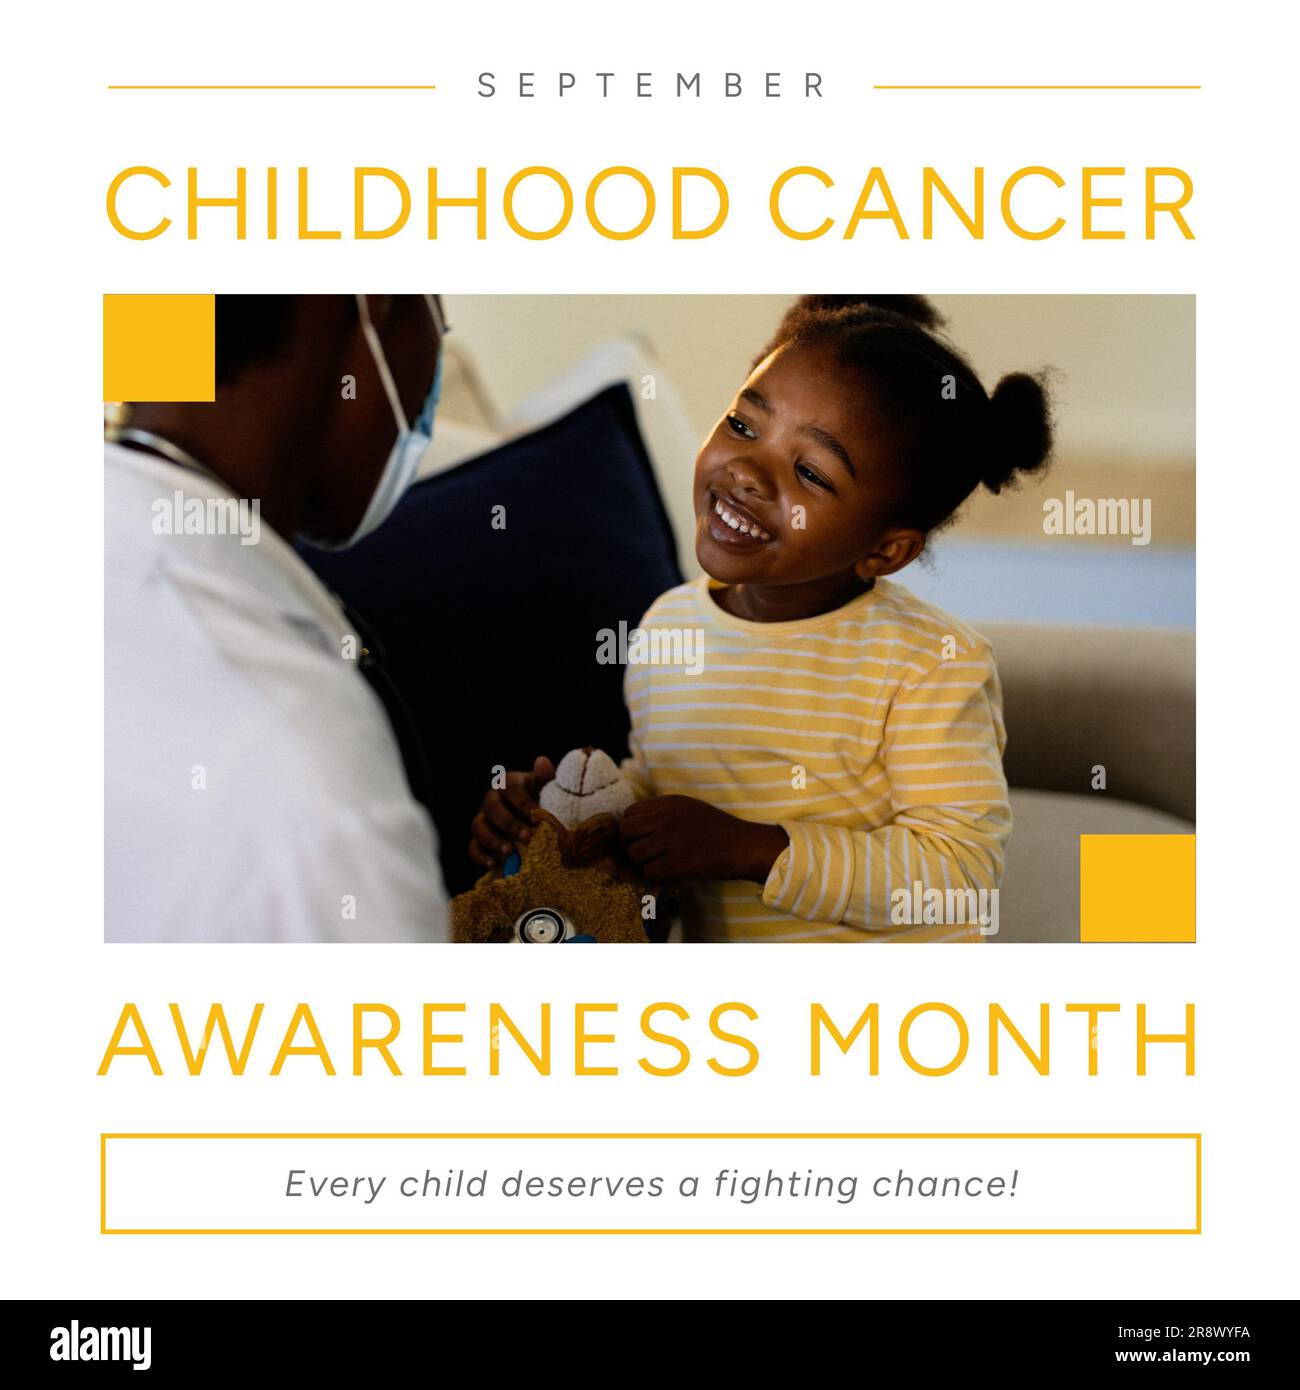 Childhood cancer awareness month text with smiling african american girl patient and male doctor Stock Photo